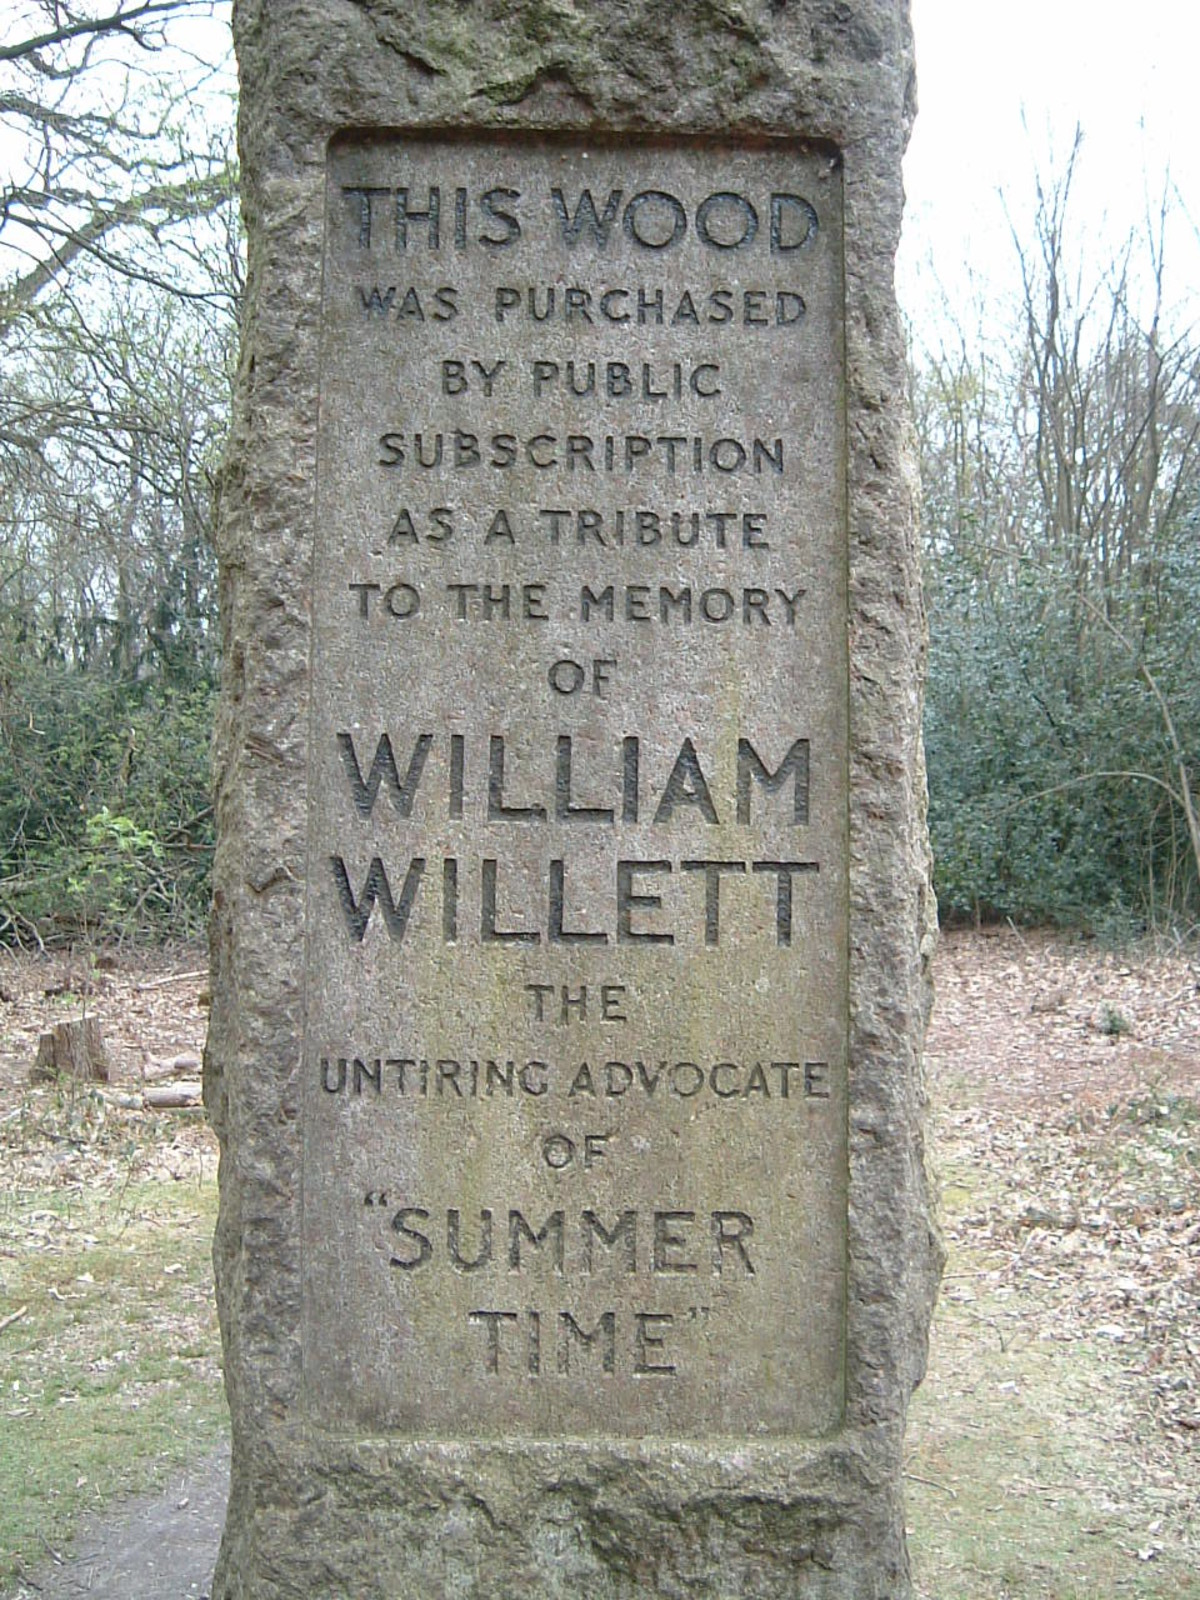 A granite marker, enscribed with the words 'This wood was purchased by public subscription as a tribute to the memory of William Willett, the untiring advocate of 